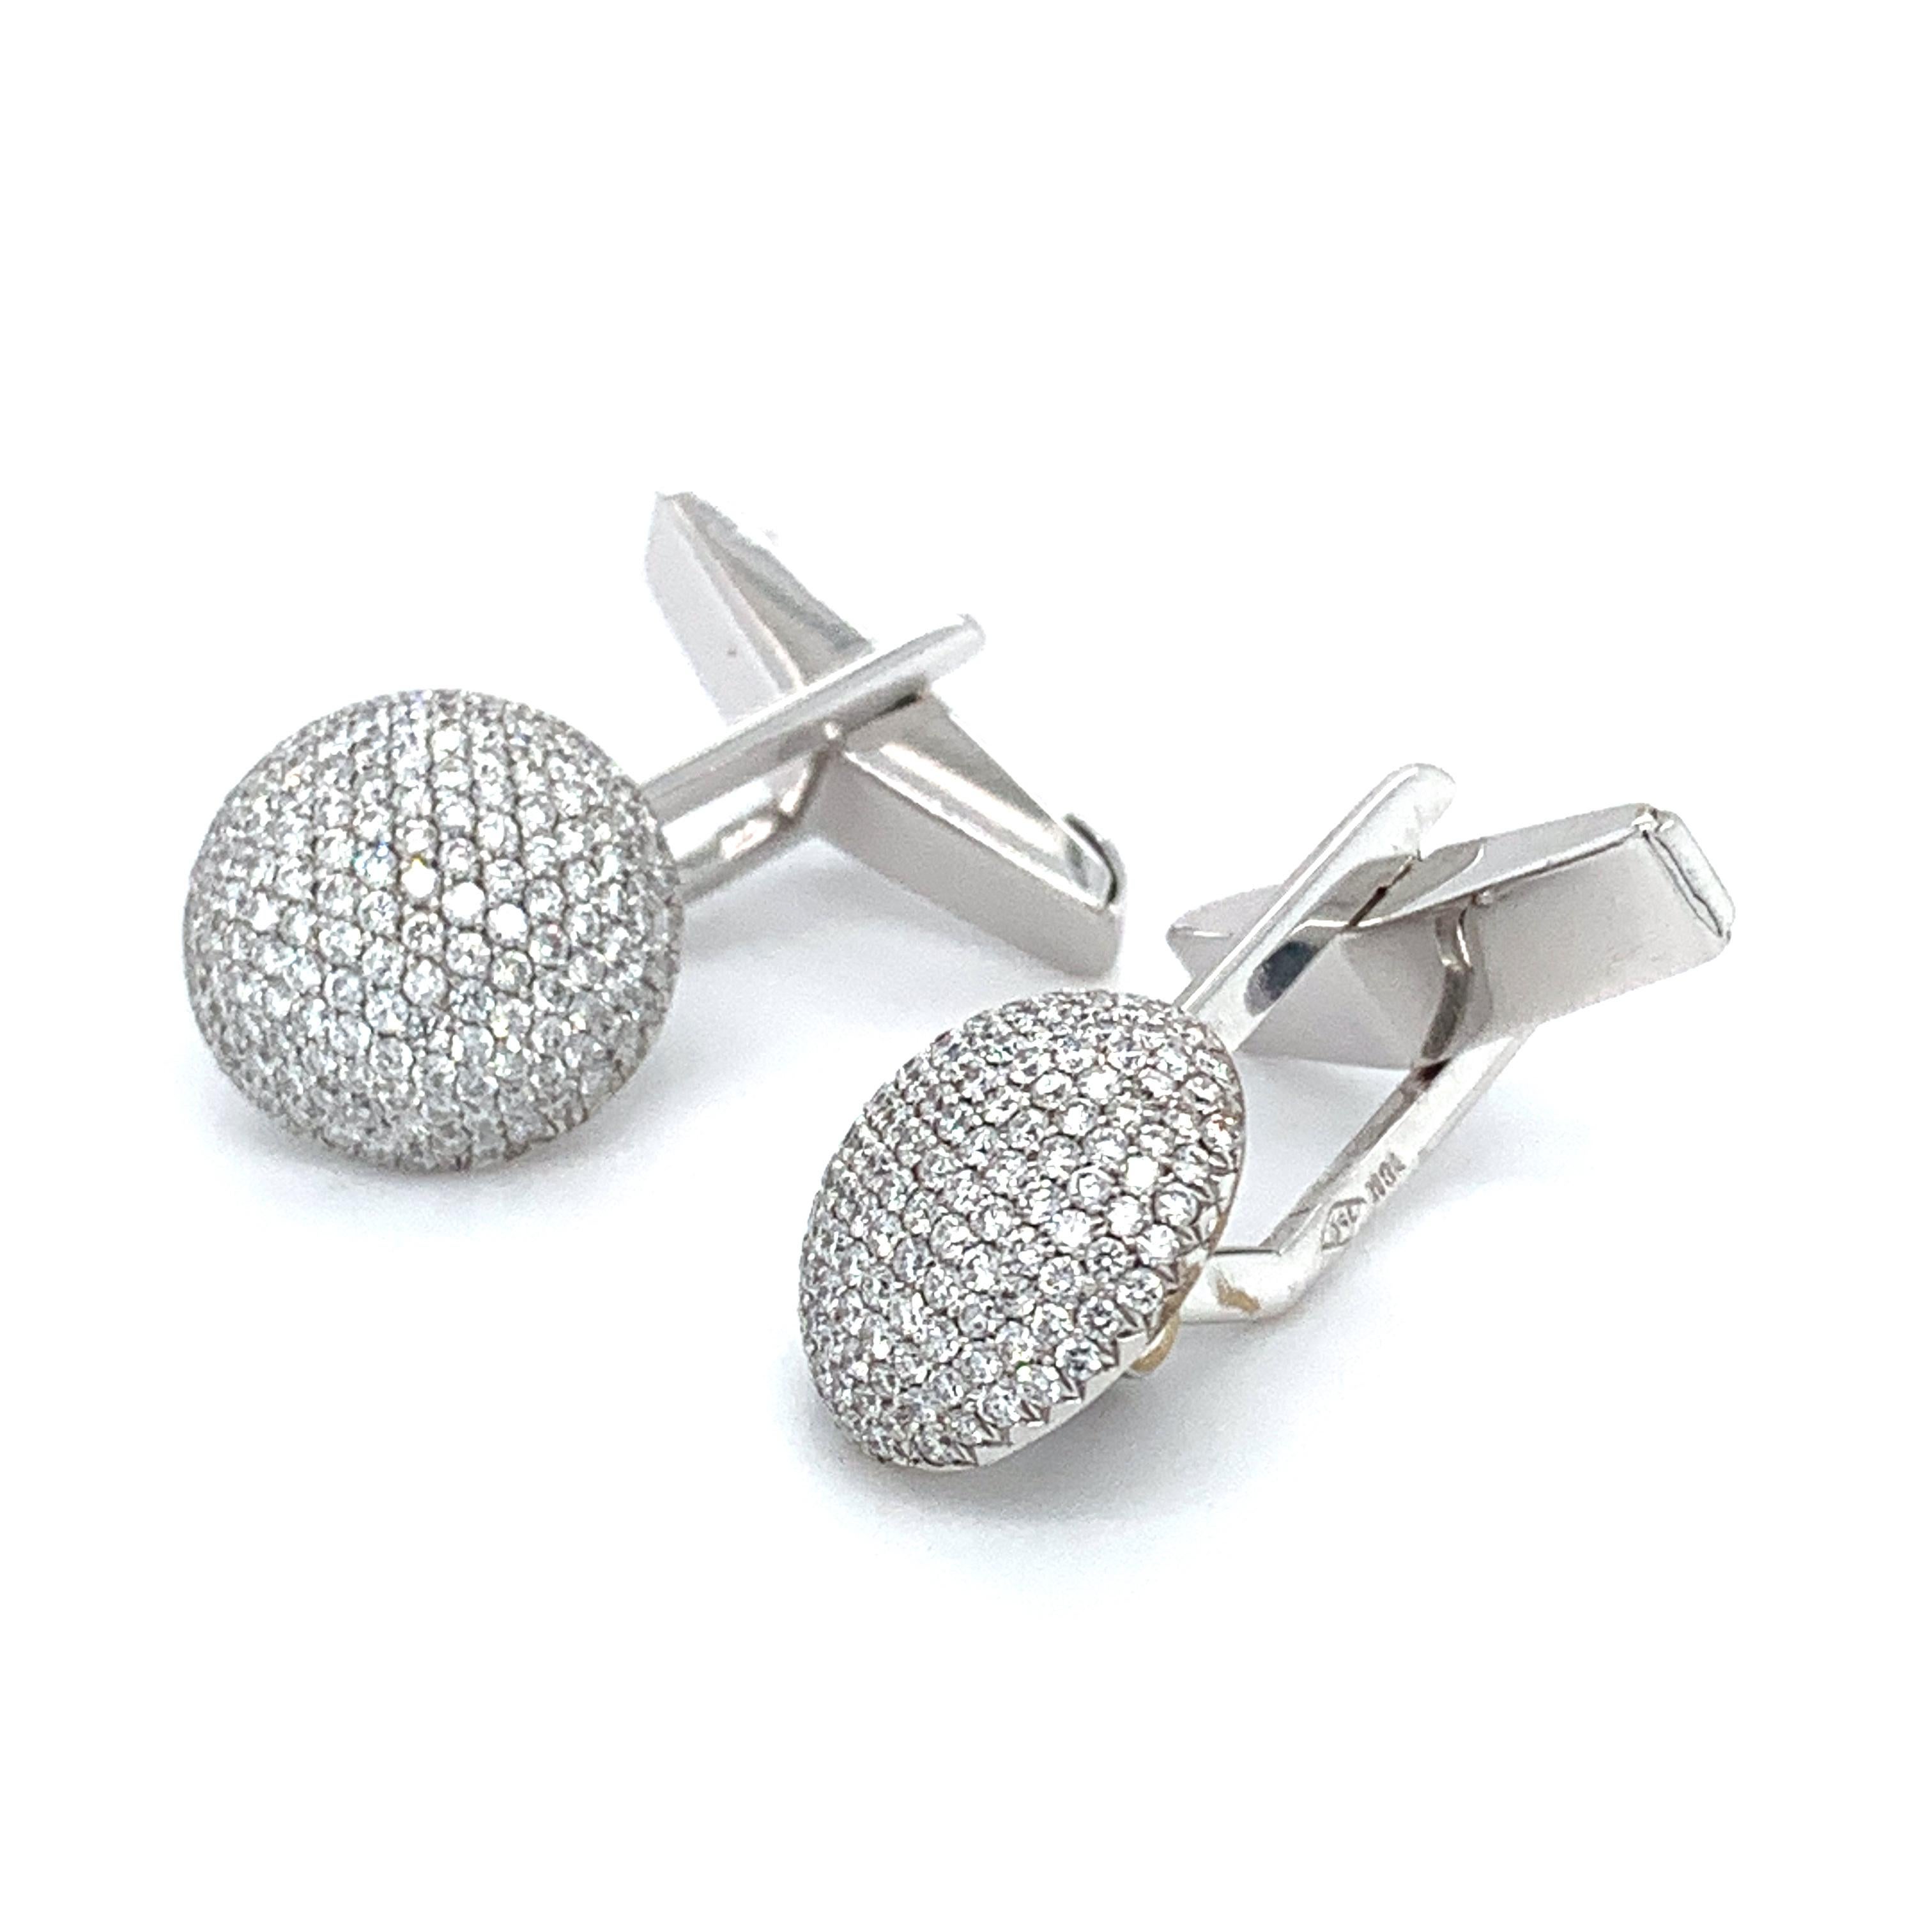 Art deco gents cufflinks in 18ct white gold
Gorgeous pair of gents art deco style cufflinks composed of round brilliant cut diamonds micropave setting all mounted in 18k white gold.
Handmade bespoke 18k white gold 
Width of the diamond buttons